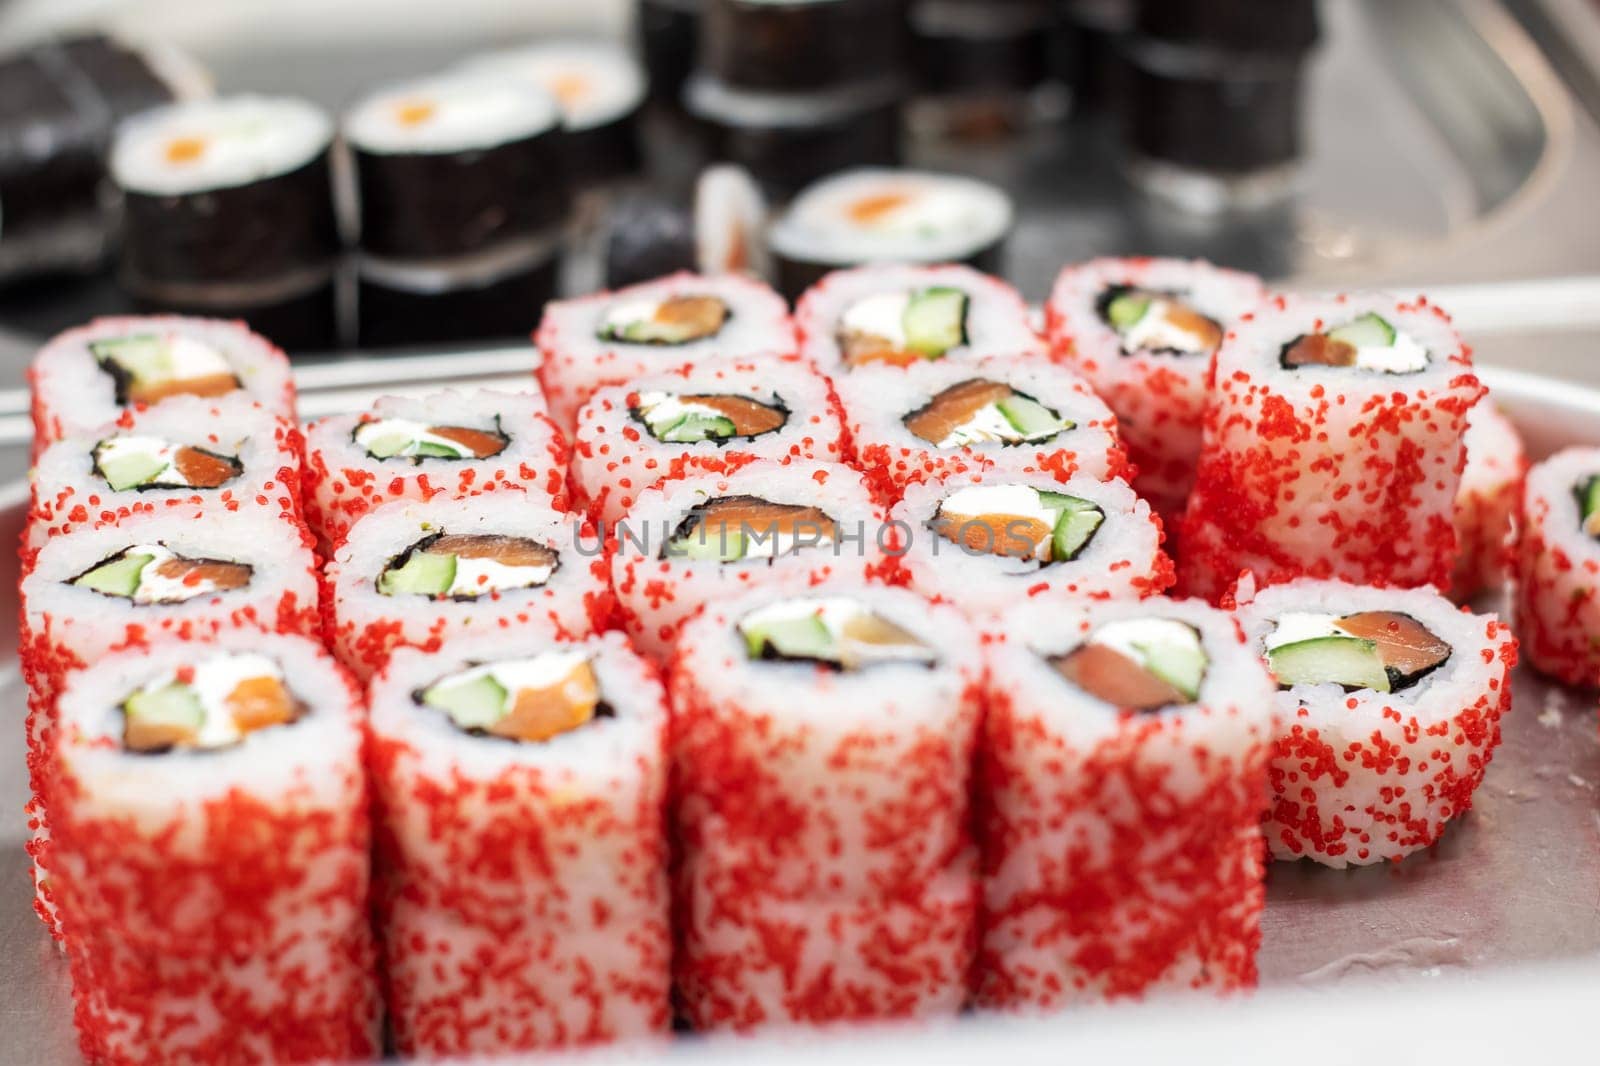 A variety of sushi rolls with red sprinkles on top, a popular ingredient in Japanese and Korean cuisine like California roll or Gimbap